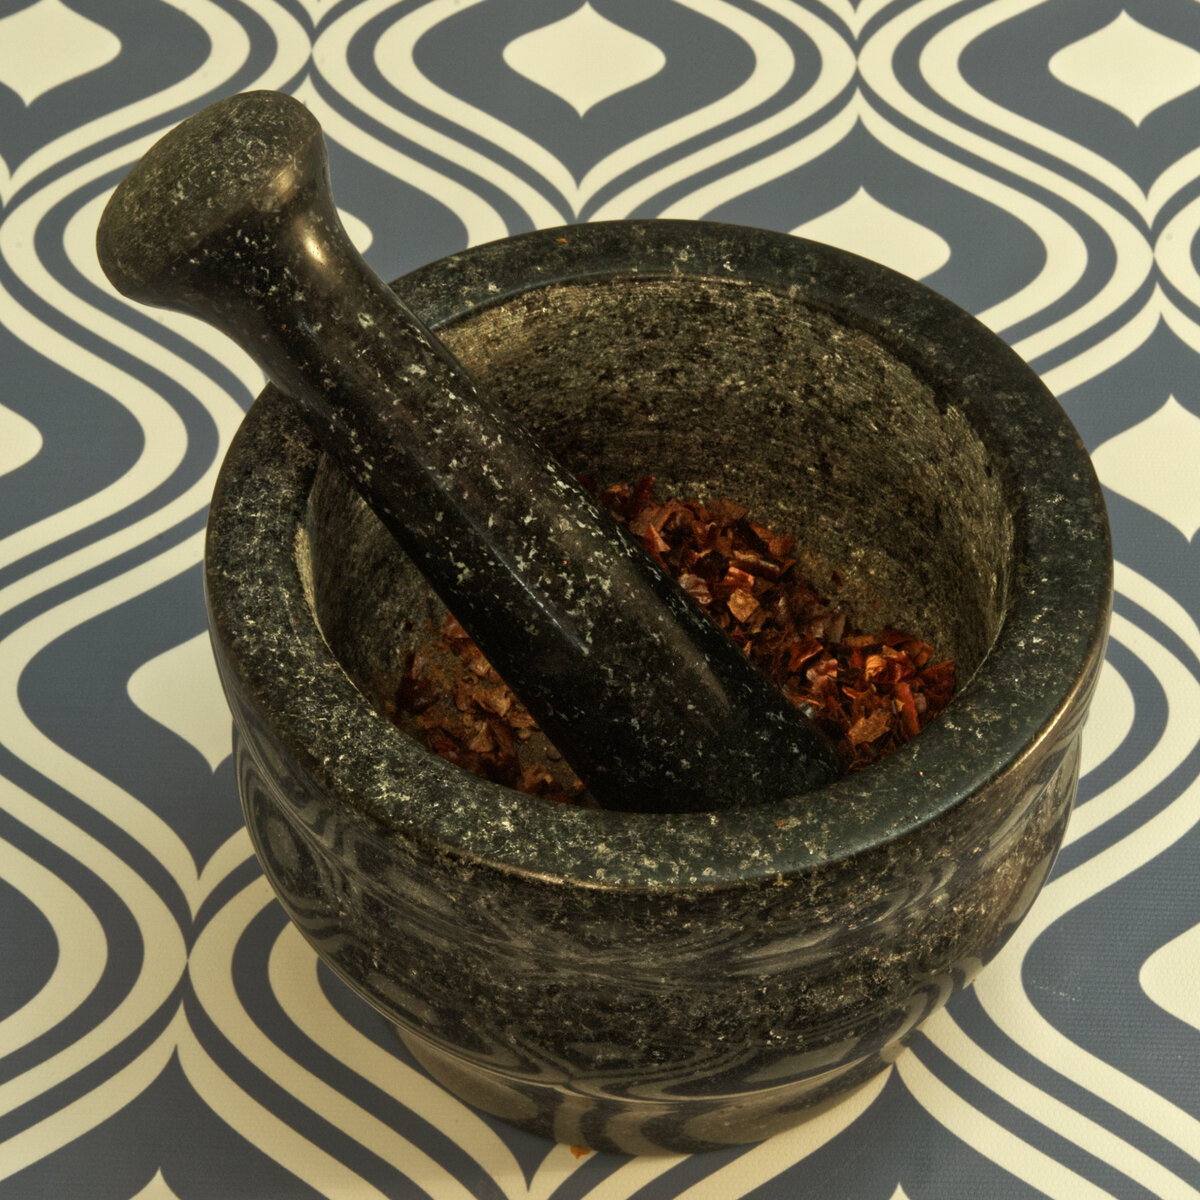 Crushed Dry Heated Chiles De Arbol using Mortar and Pestle